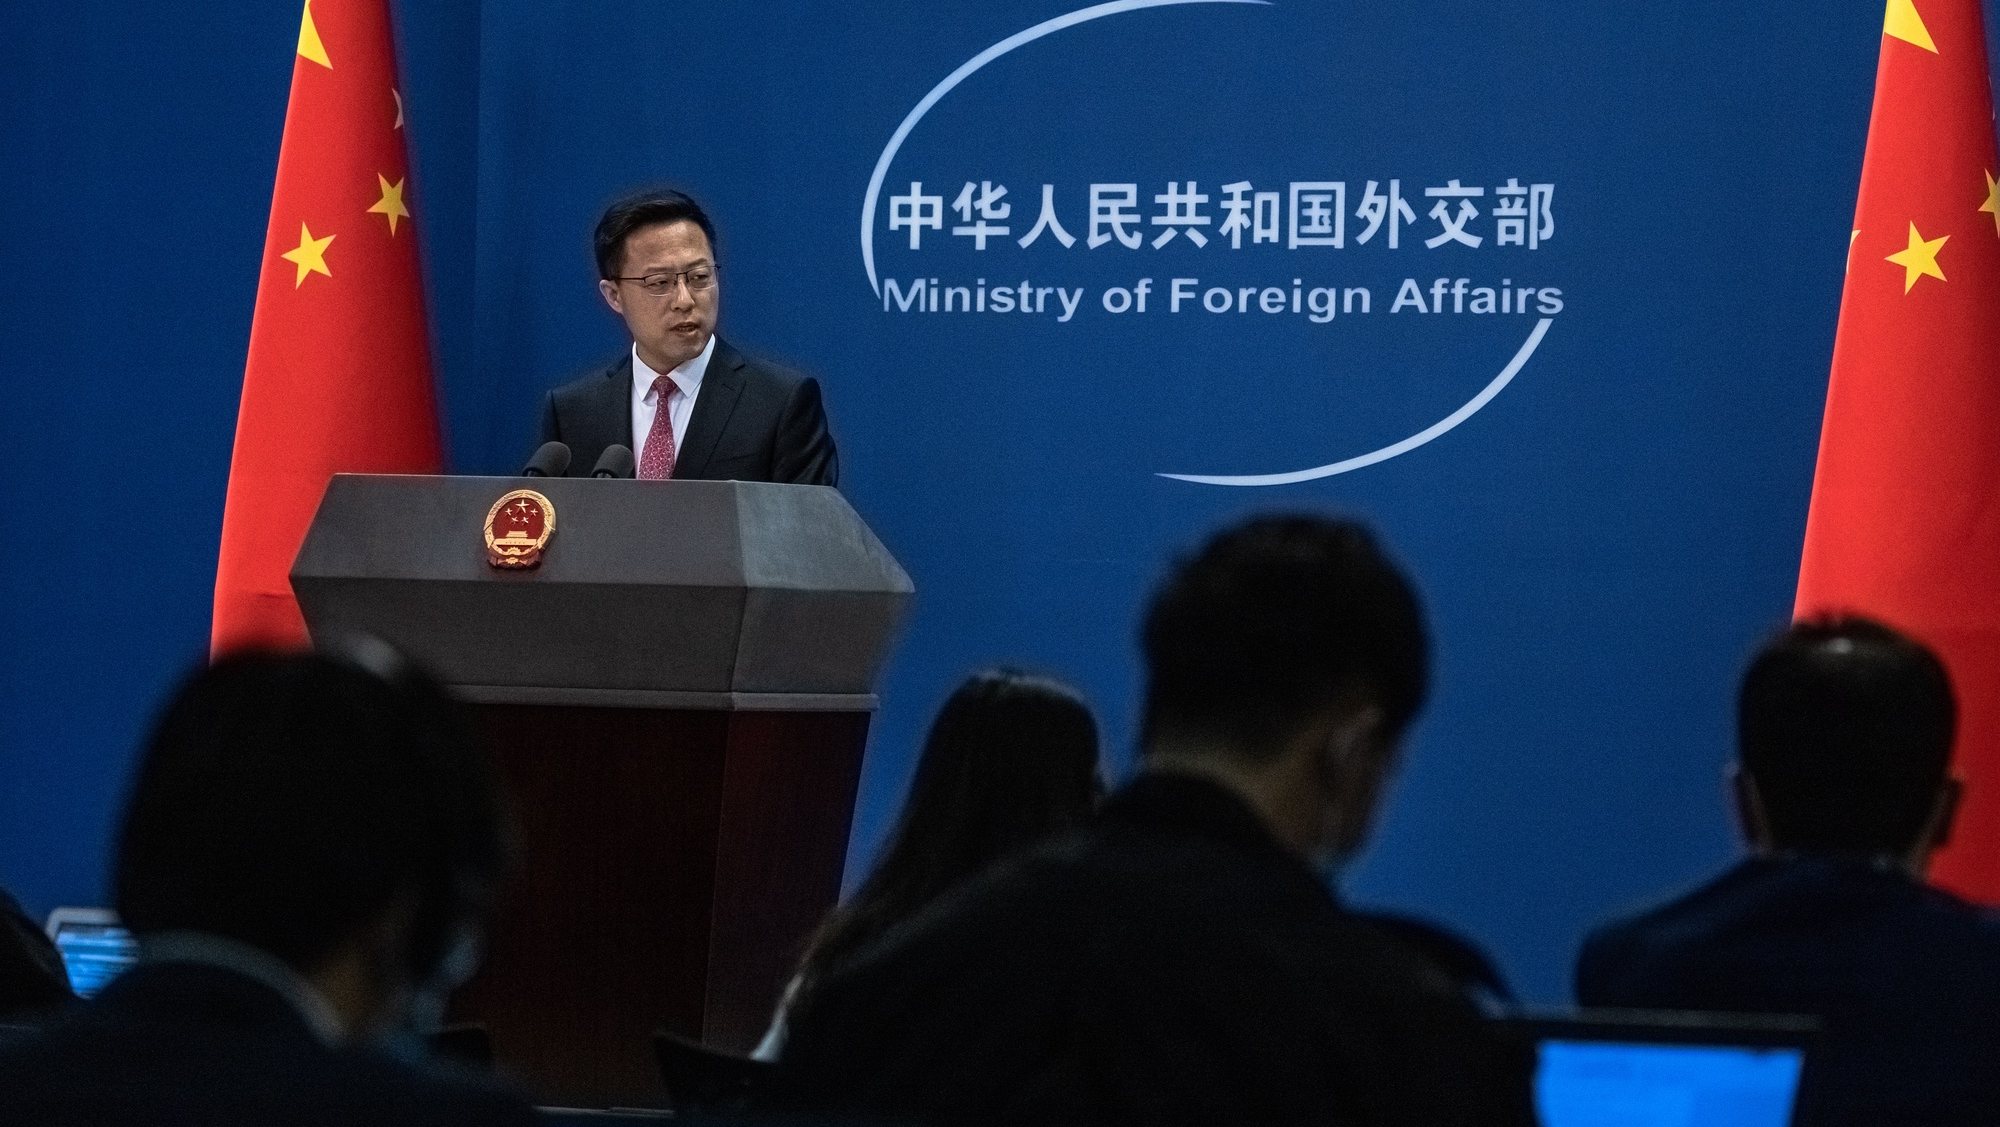 epa09083383 Chinese Foreign Ministry spokesman Zhao Lijian speaks during a daily media briefing in Beijing, China, 19 March 2021. Canadians Michael Spavor and Michael Kovrig, detained by Chinese authorities in 2018 and accused of espionage, will go on trial on 19 and 22 March 2021.  EPA/ROMAN PILIPEY